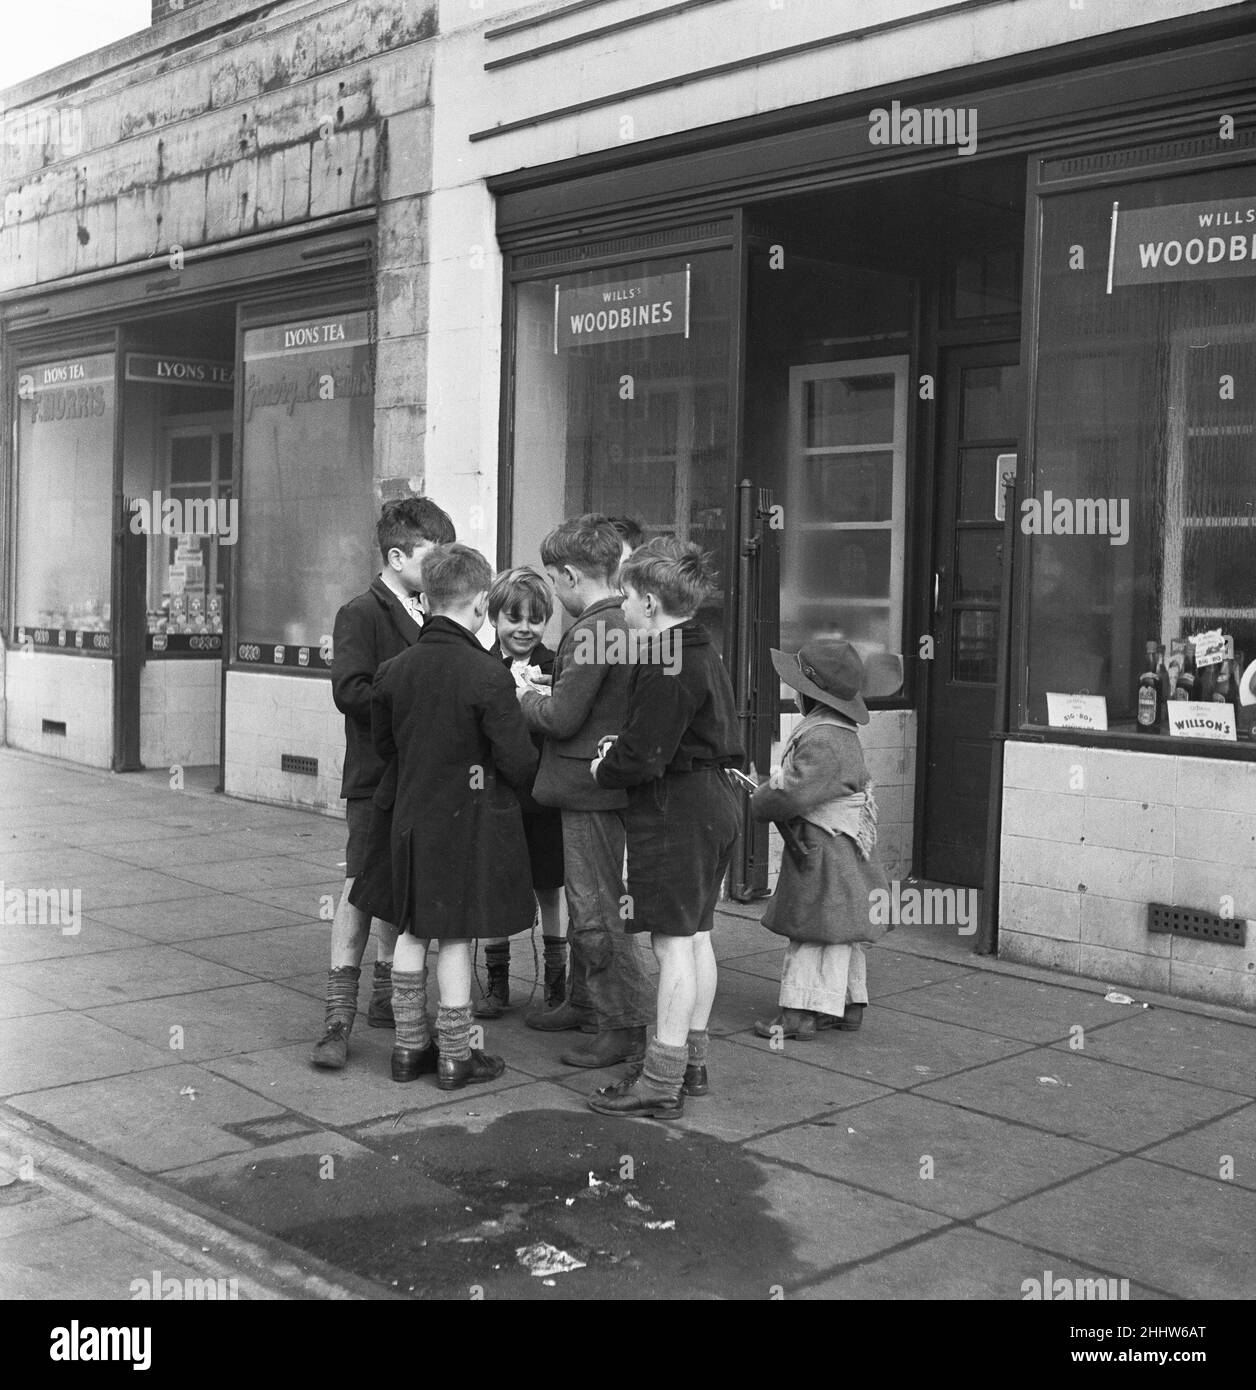 Life in the Mirror Our Gang. 19th January 1954  A gang of boys plot todays agenda of mischief and mayhem outside a tobacconist in Bow Road in the East End of London Mirror Captions: This is The Conference. Not the stiff necked, prim and tight lipped Conference of the Foreign Minister coming off next week in Berlin, but the Conference down OUR street. OUR street being Bow Road, London. Six Kids (some of 'em in sad need of a hair cut) are plotting today's glorious agenda of mischief by boys for boys - including a couple of escapades for the pint sized Mountie and Young Sloppy - Sock there on the Stock Photo